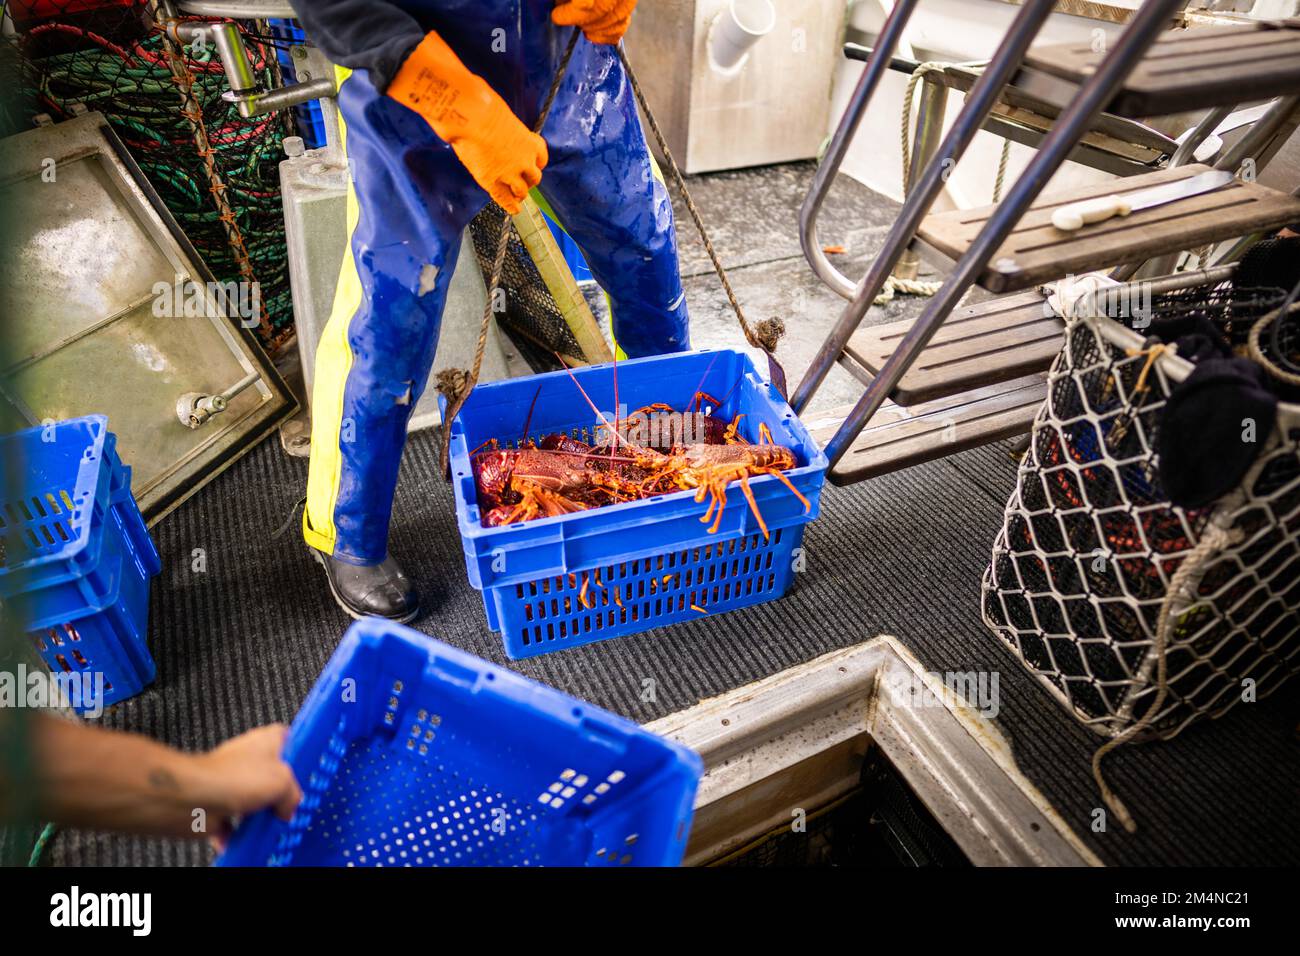 fish market with fish and crustations. seafood in australia Stock Photo